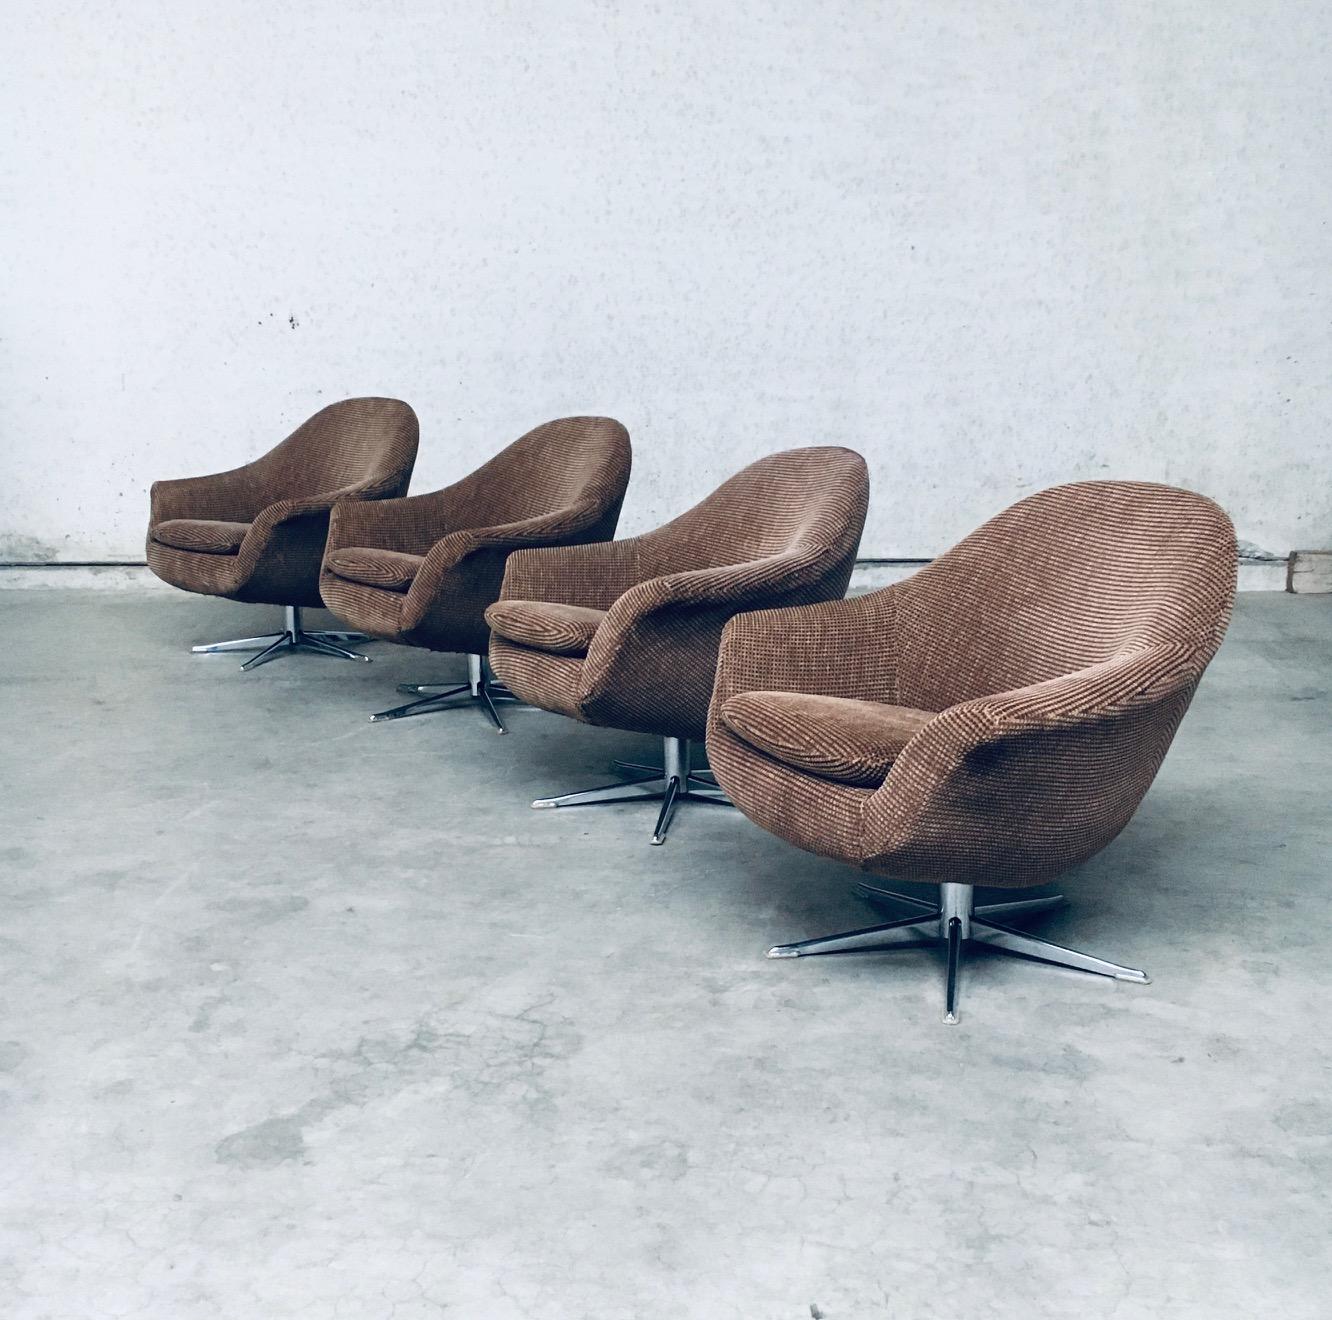 Vintage Mid-Century Modern Scandinavian Design Space Age Swivel EGG Lounge Chair set of 4. Made in the 1970s. In the style of Overman, Sweden. Pod model on swivel base. Brown fabric on chrome feet. All 4 are in good overall original condition. They